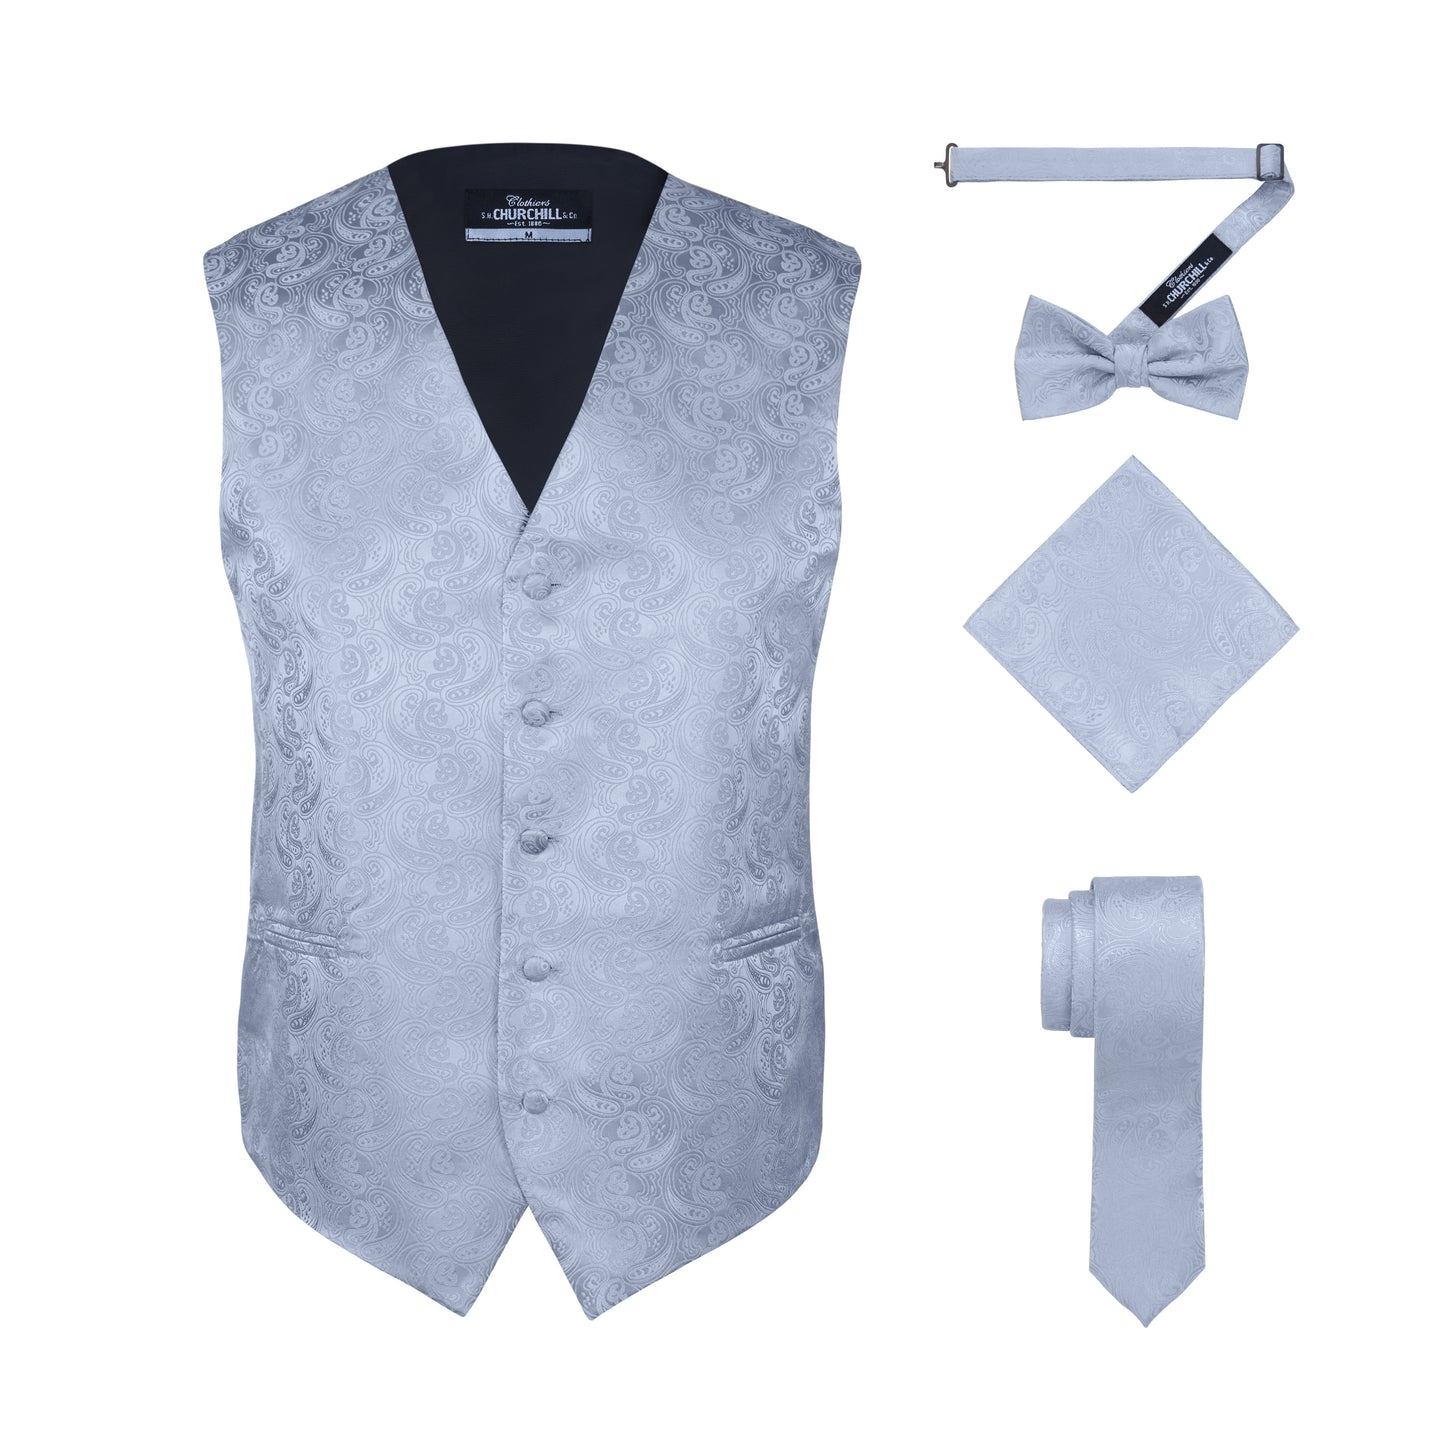 S.H. Churchill & Co. Men's Silver Paisley Vest Set, with Bow Tie, Neck Tie and Pocket Hanky